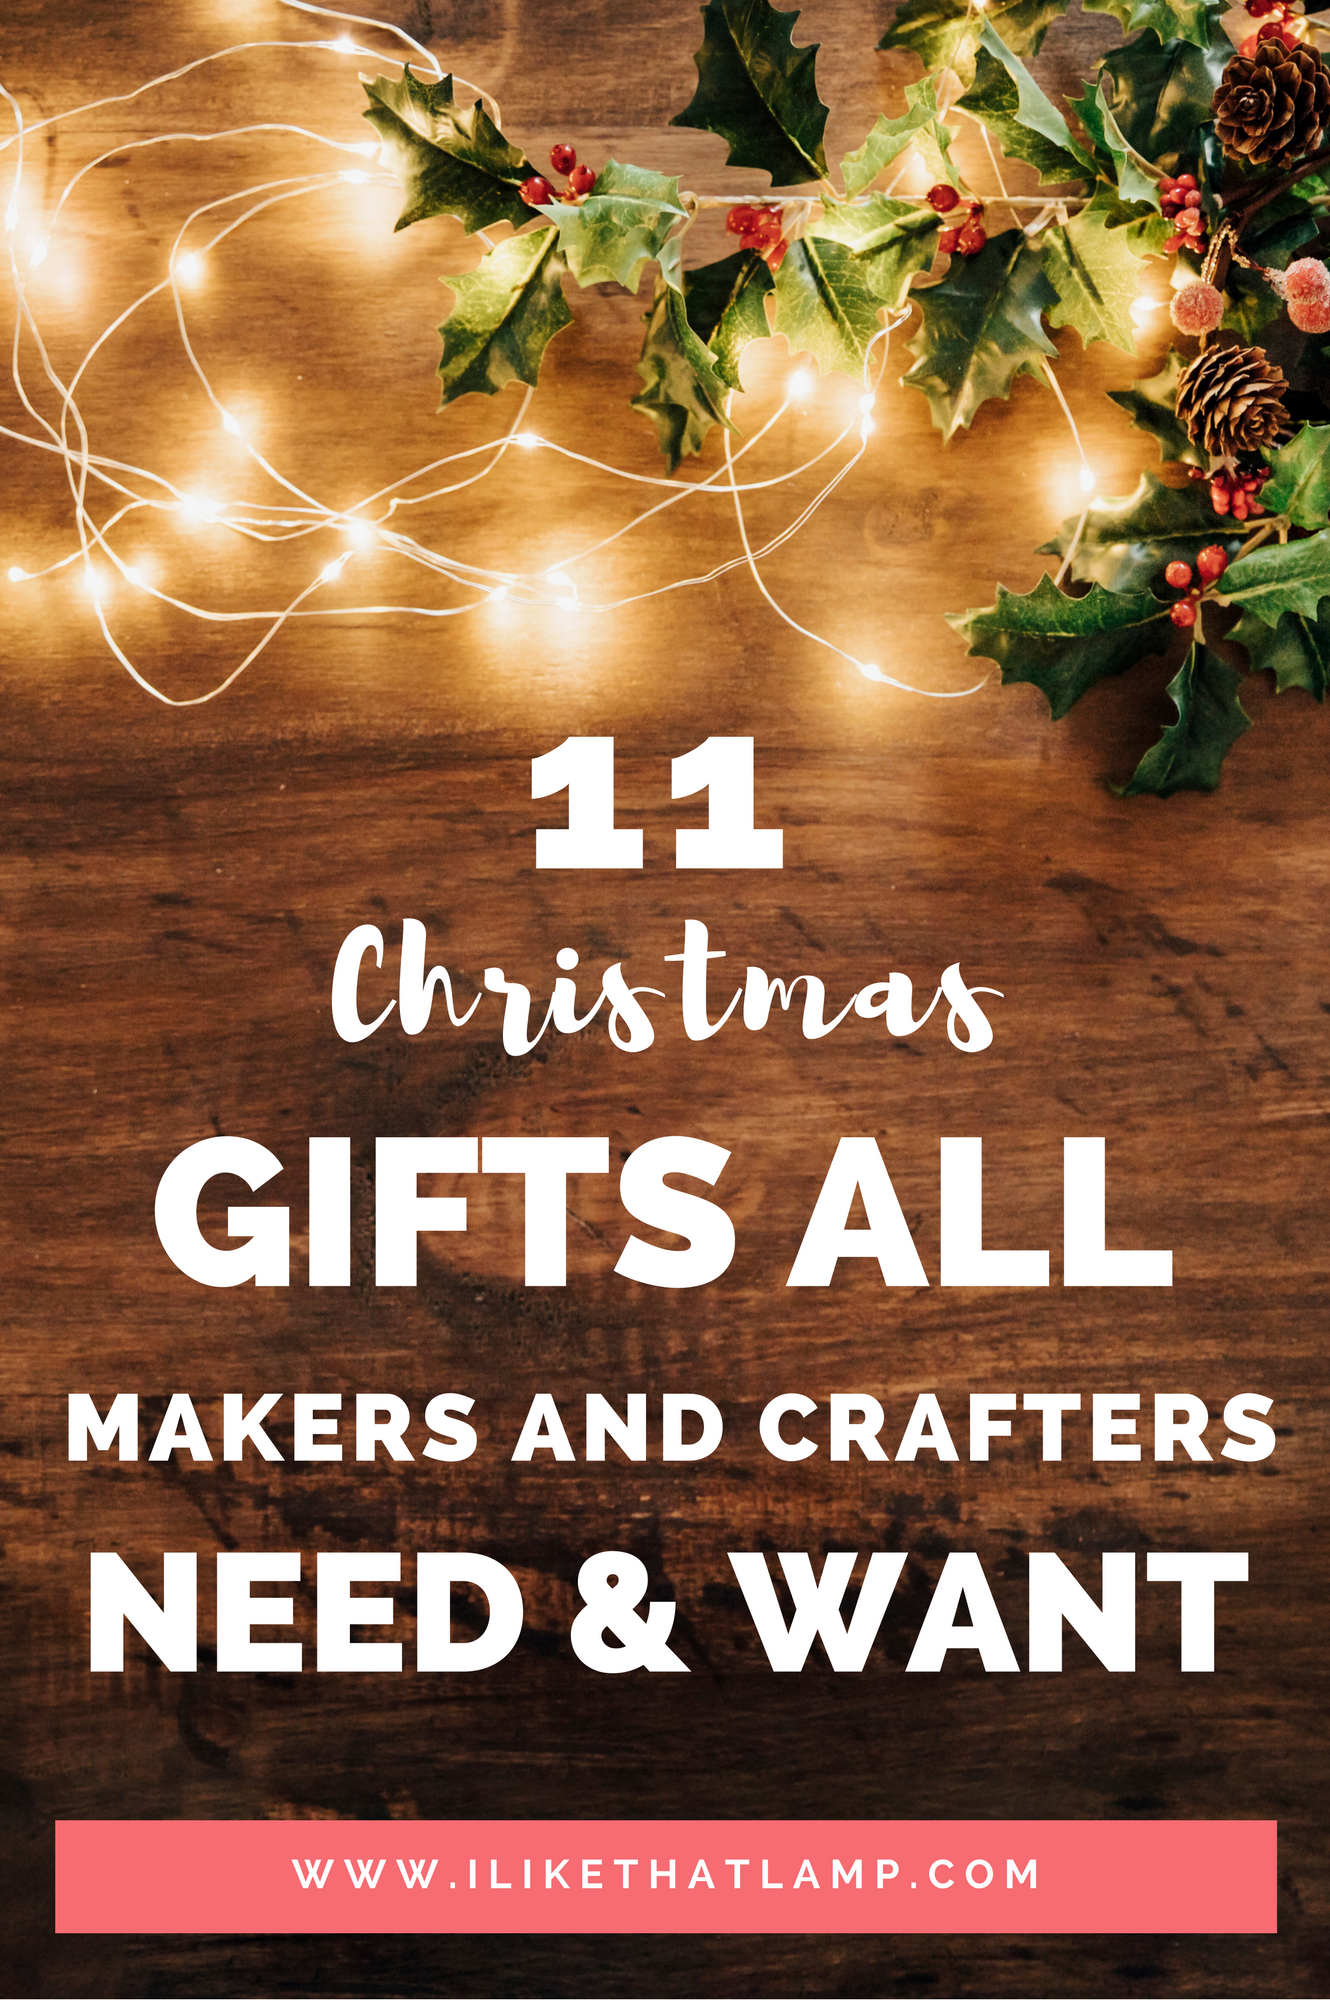 11 Christmas Gift Ideas that Make Crafters Say WOW! - I Like That Lamp